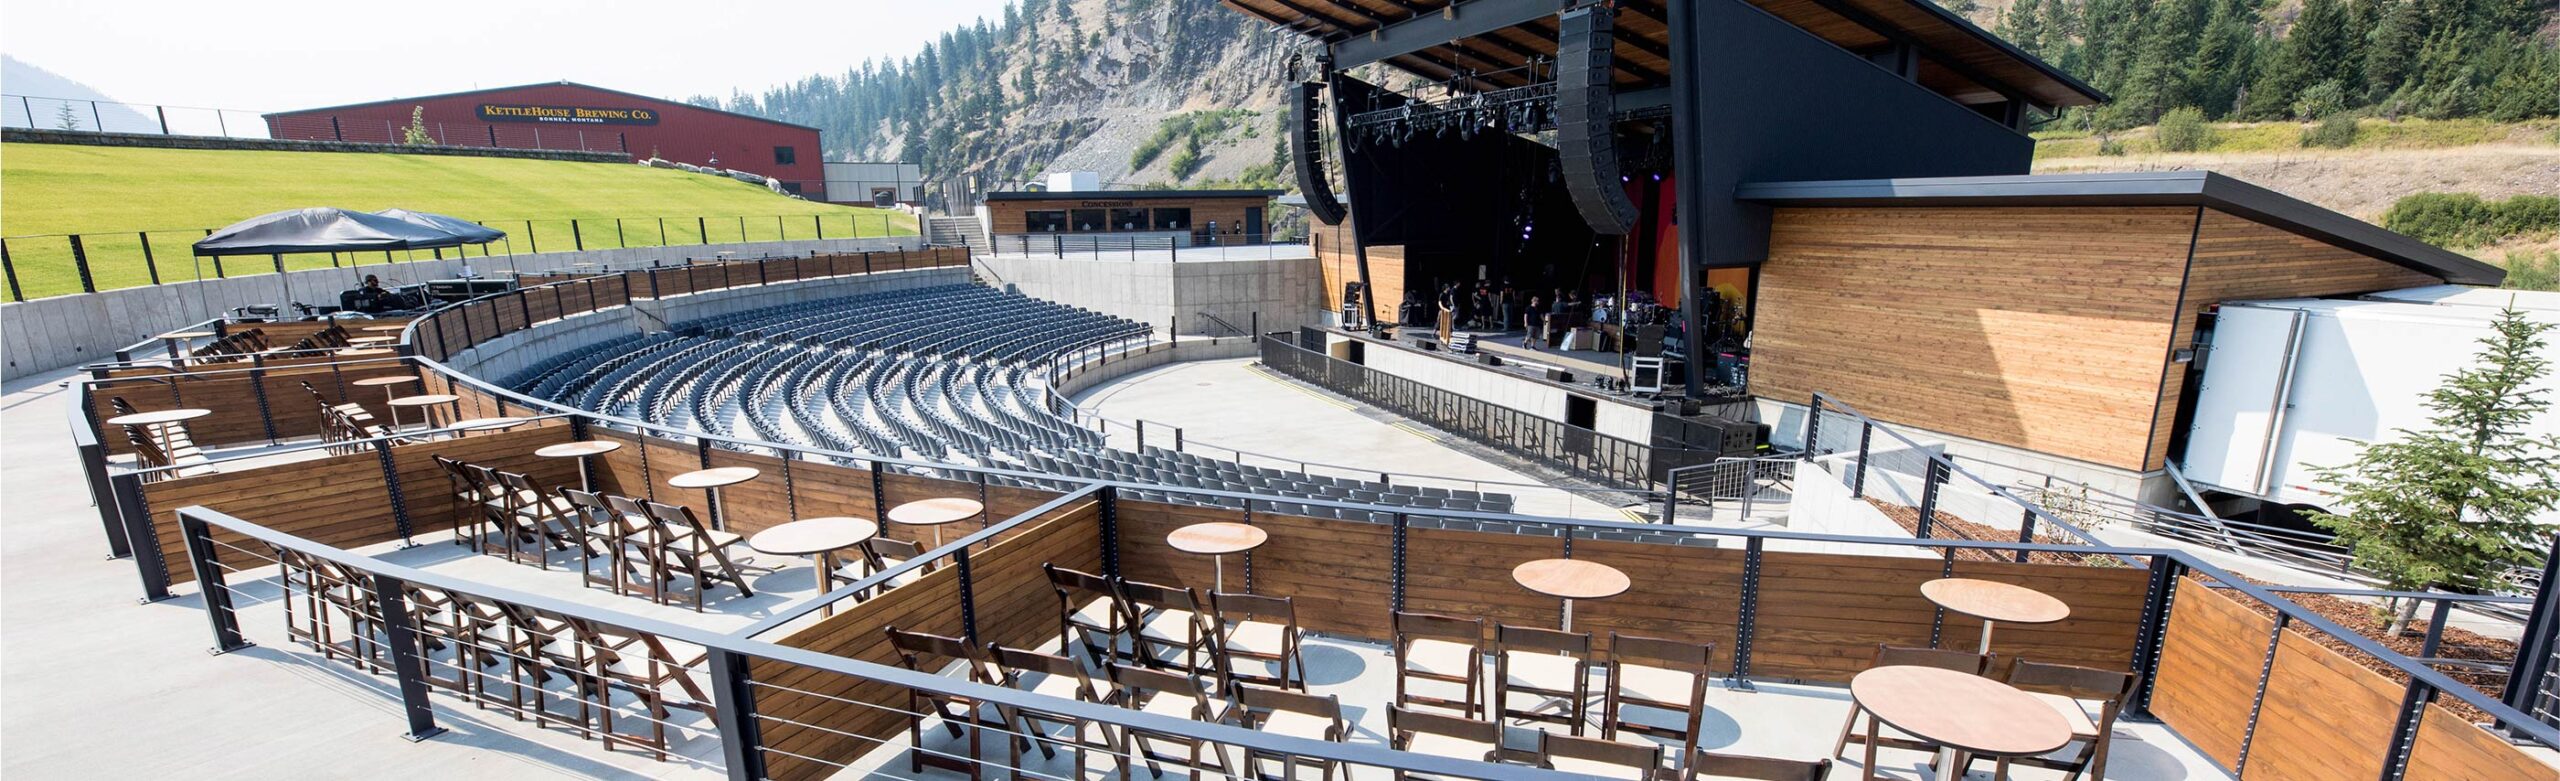 SPECIAL OFFER: Premium Box Released for Death Cab for Cutie at KettleHouse Amphitheater Image